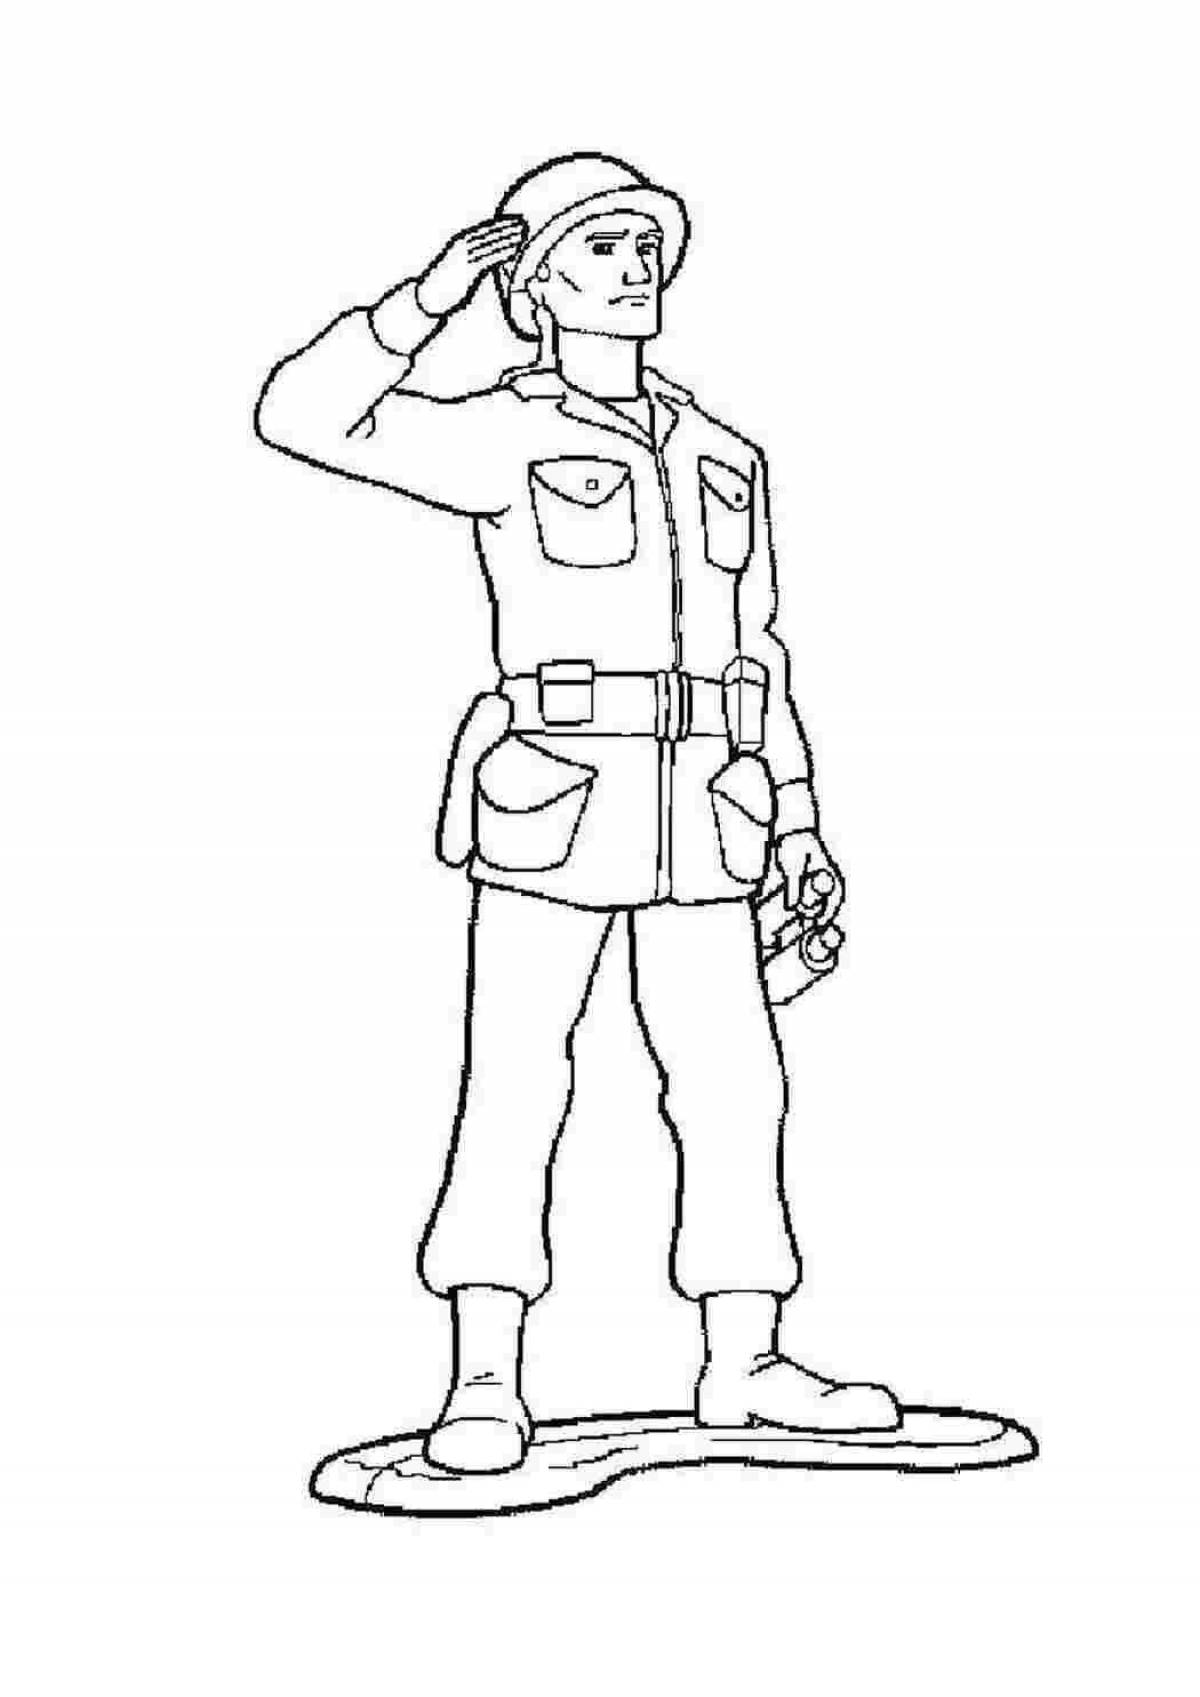 Playful toy soldier and children's coloring book